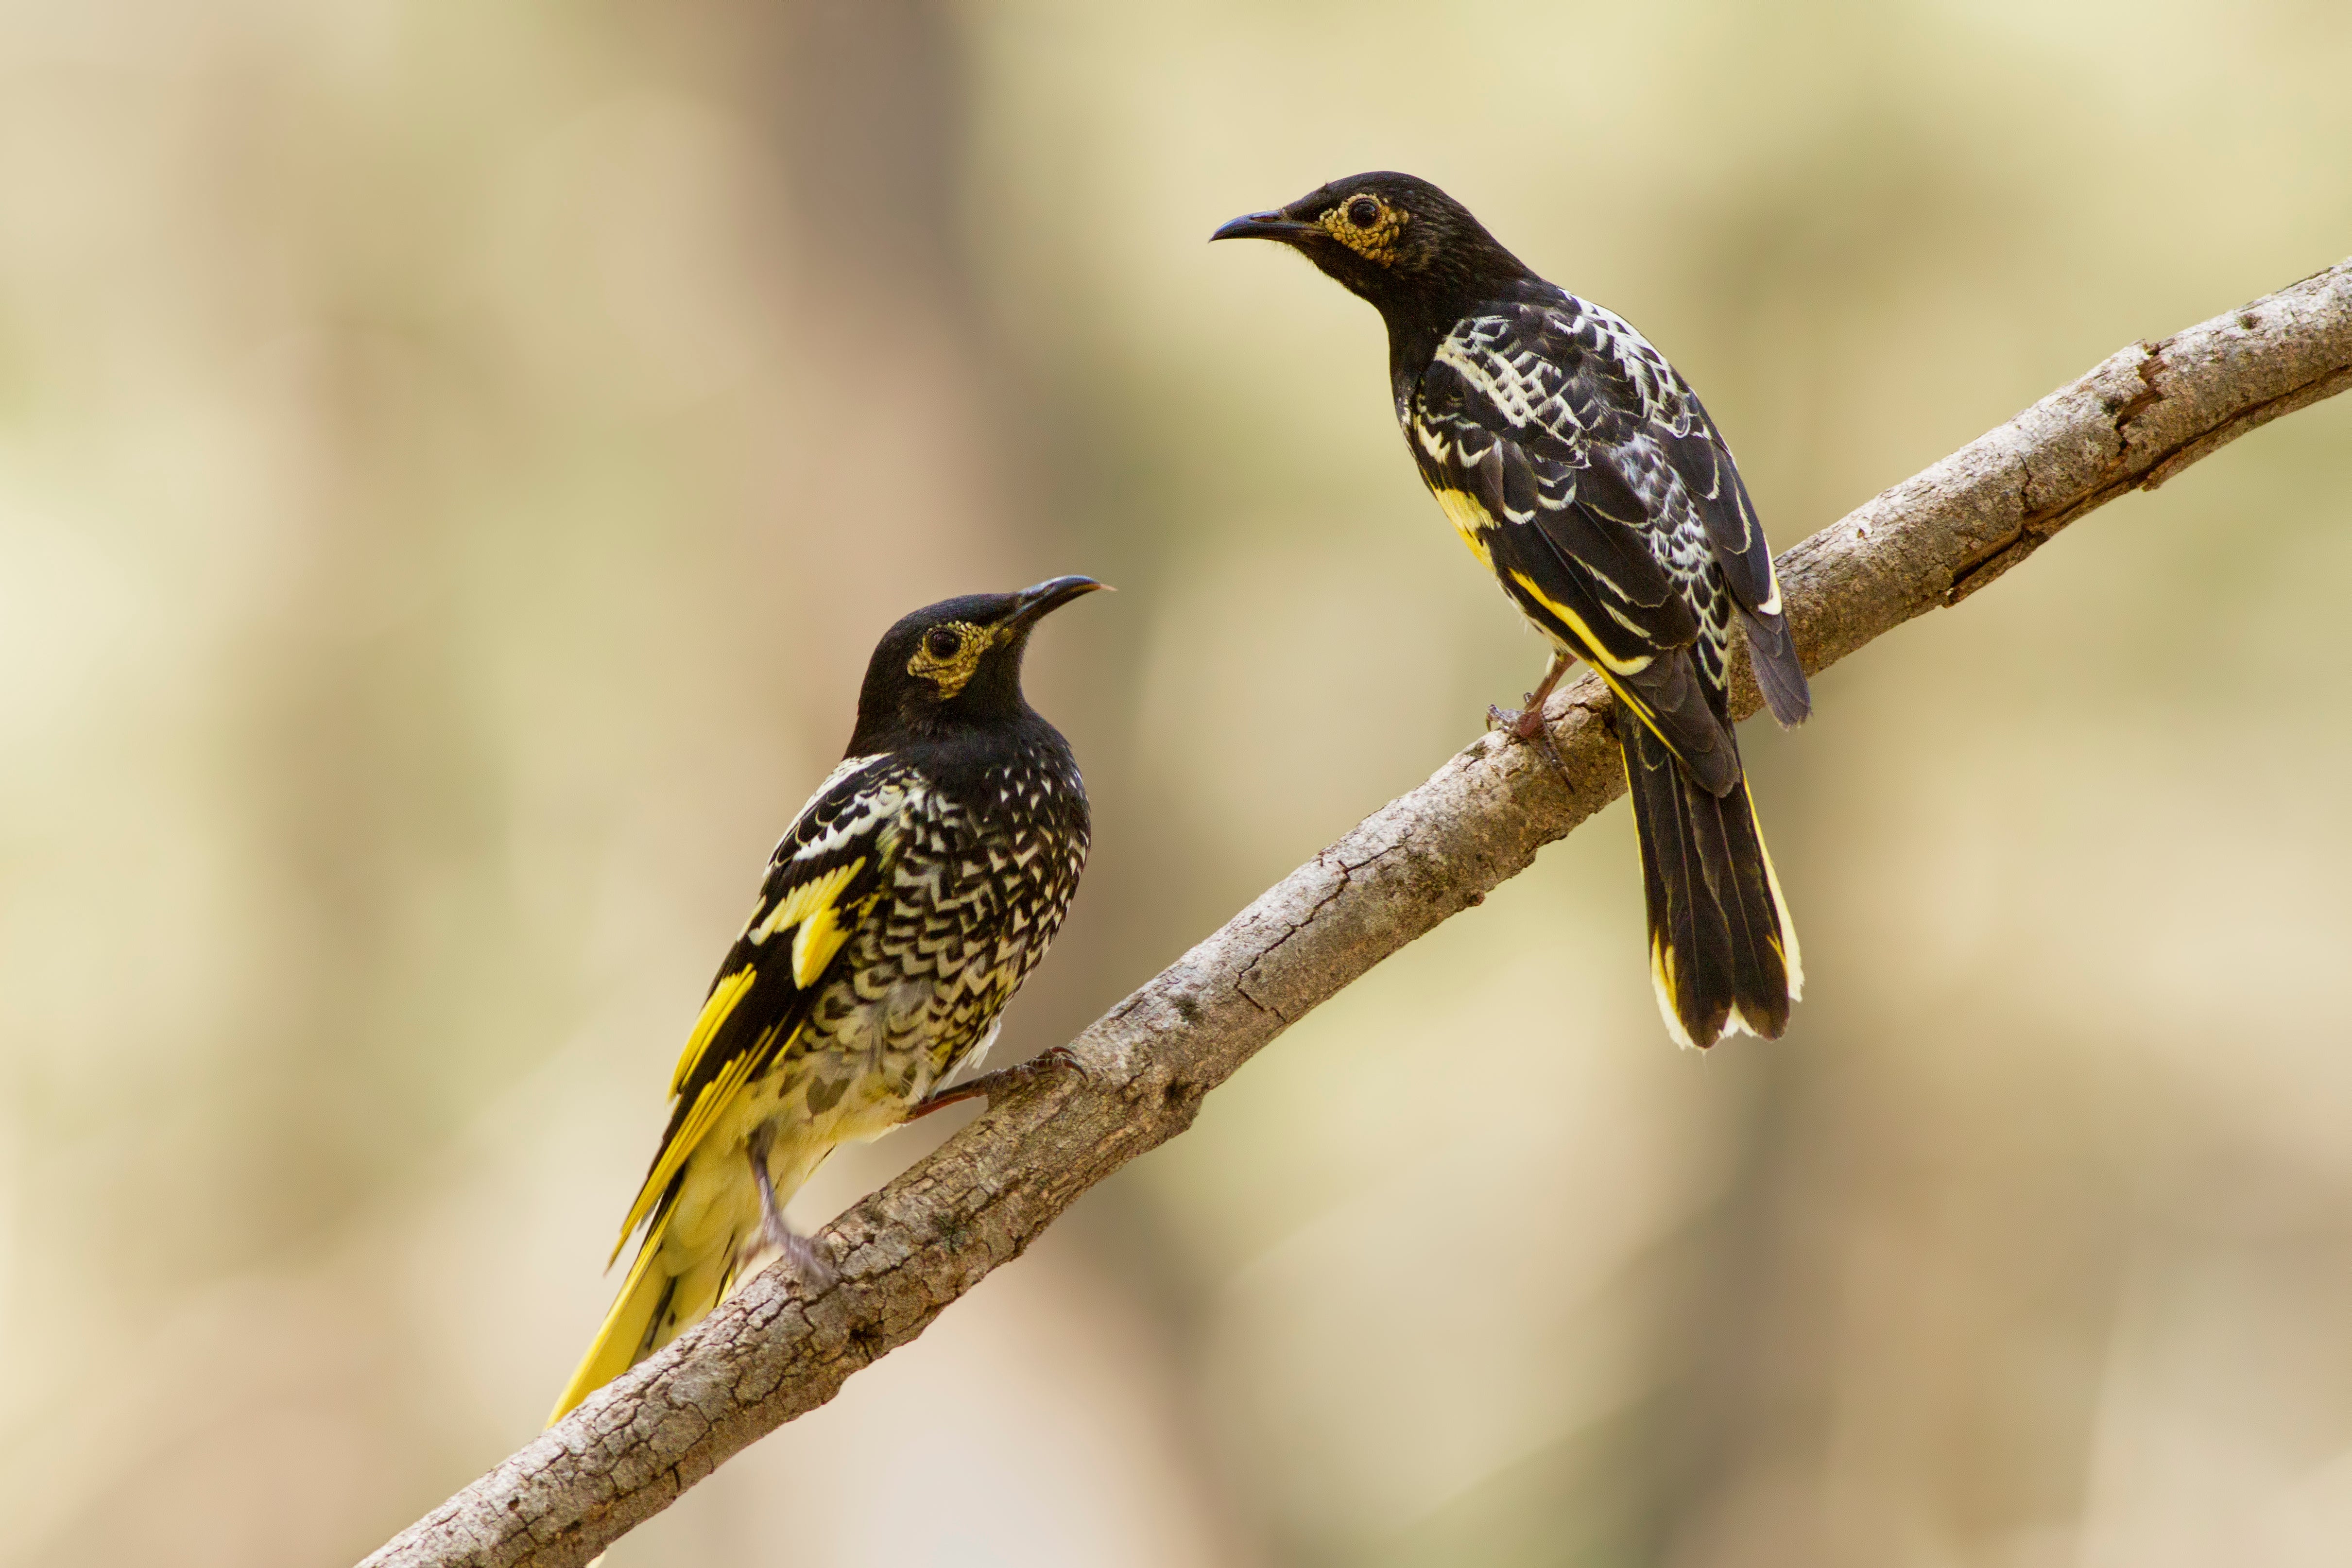 Male regent honeyeater birds in Capertee Valley in New South Wales. The distinctive black and yellow birds were once common across Australia